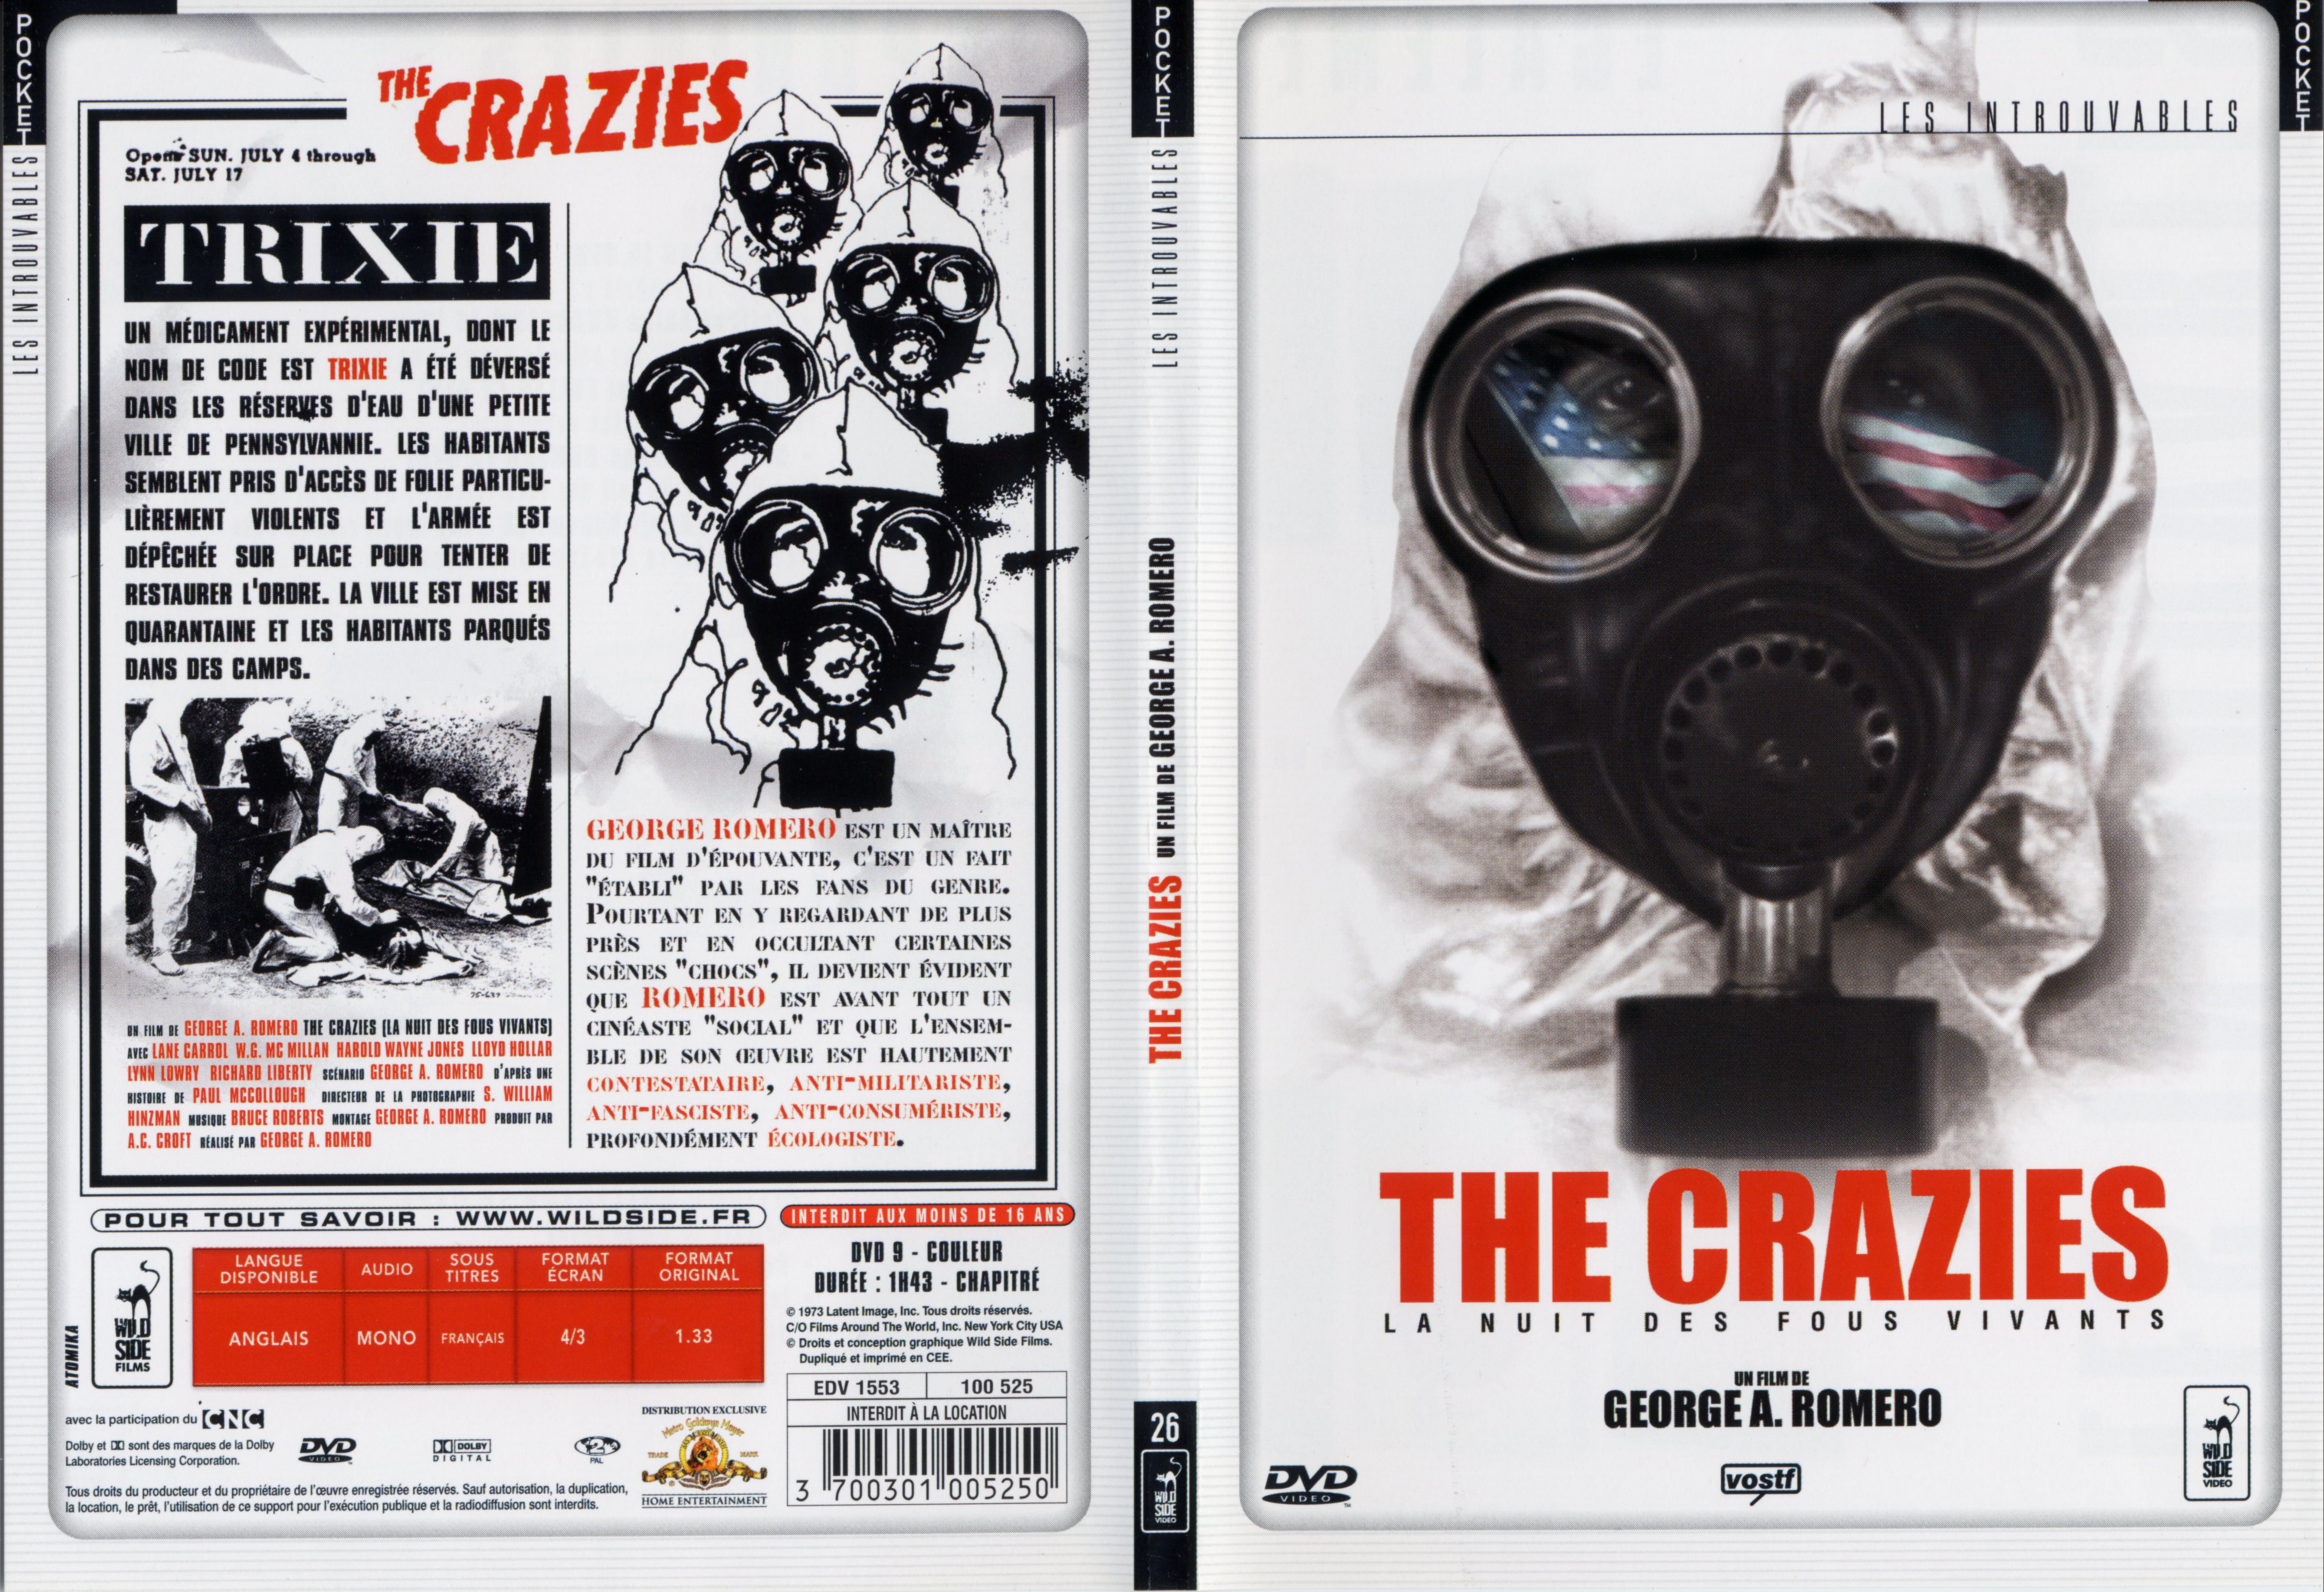 Jaquette DVD The crazies